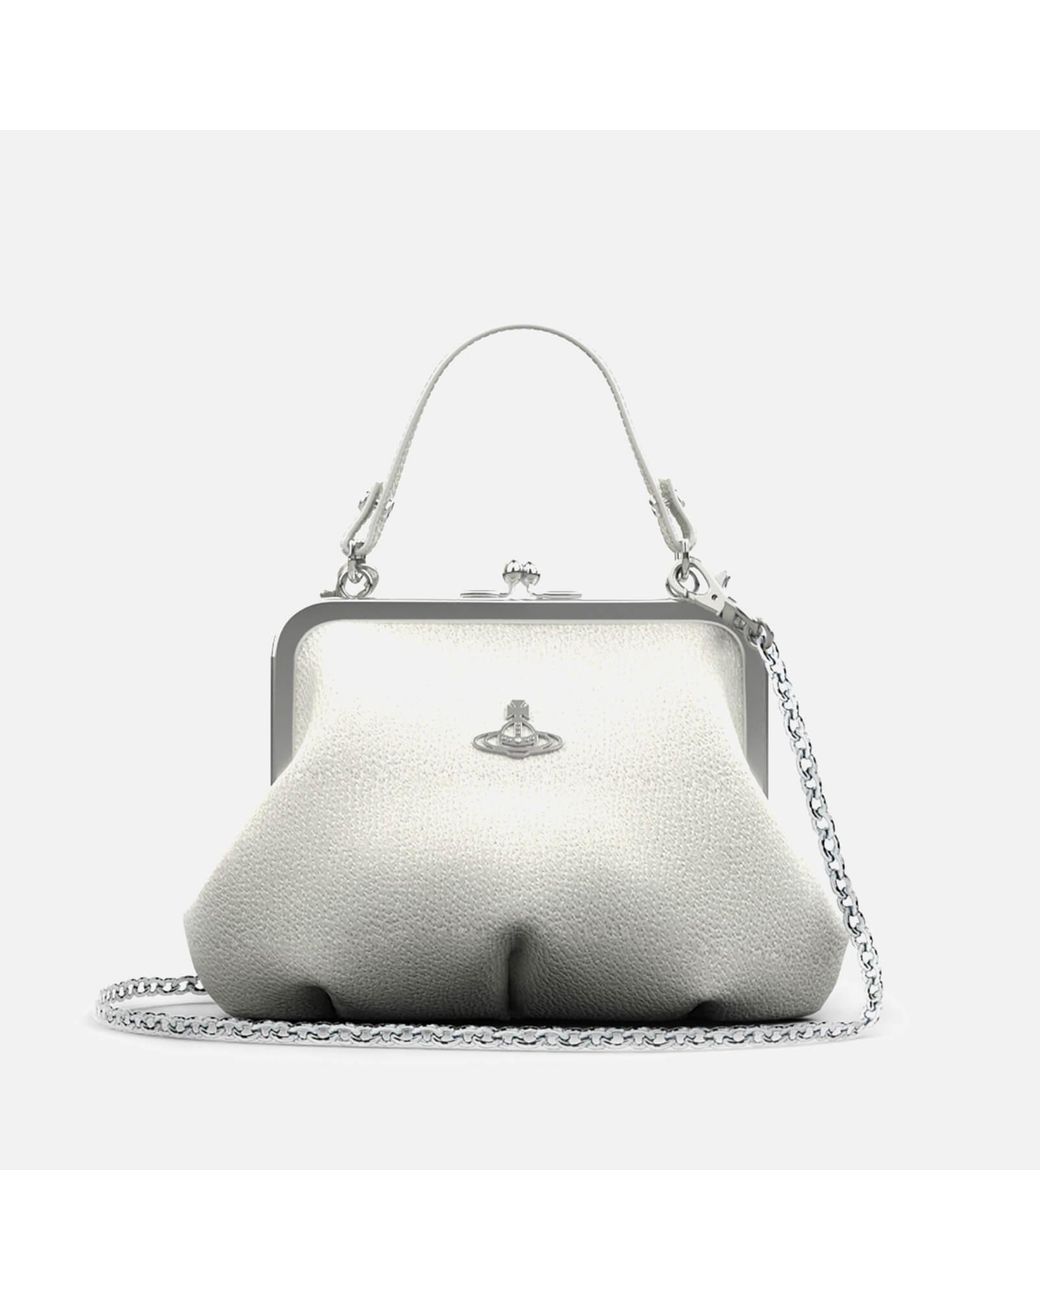 Vivienne Westwood Granny Faux Leather Frame Purse in White | Lyst